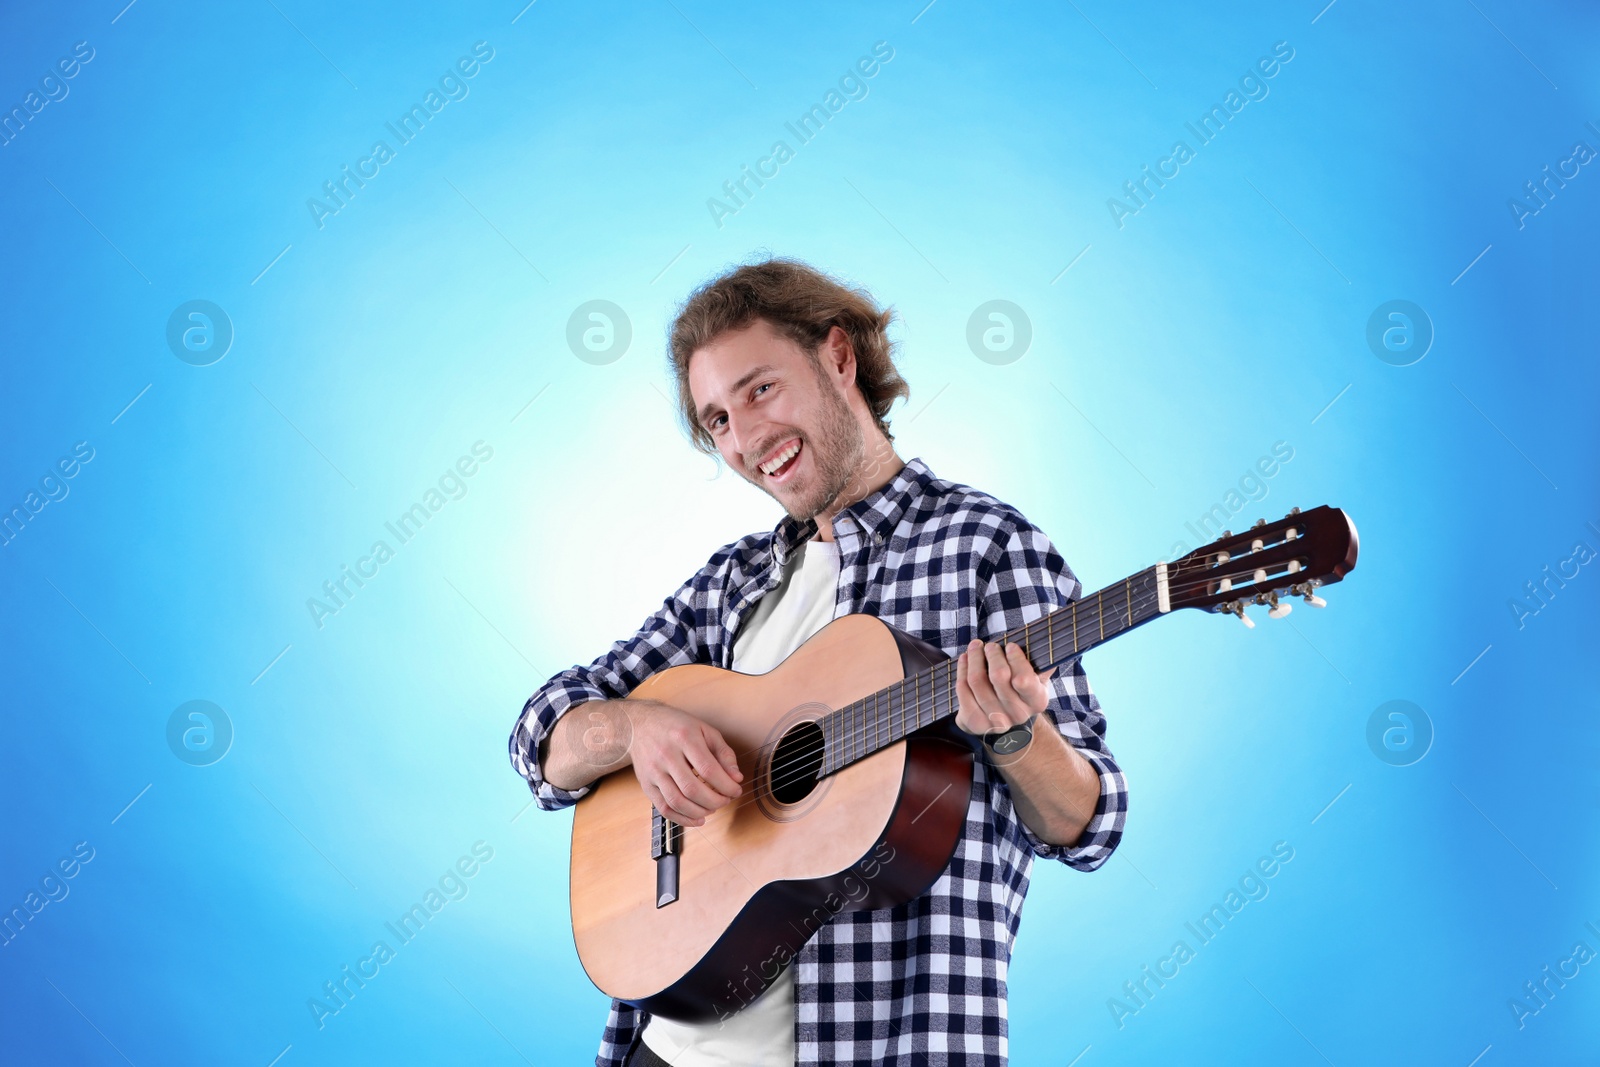 Photo of Young man playing acoustic guitar on color background